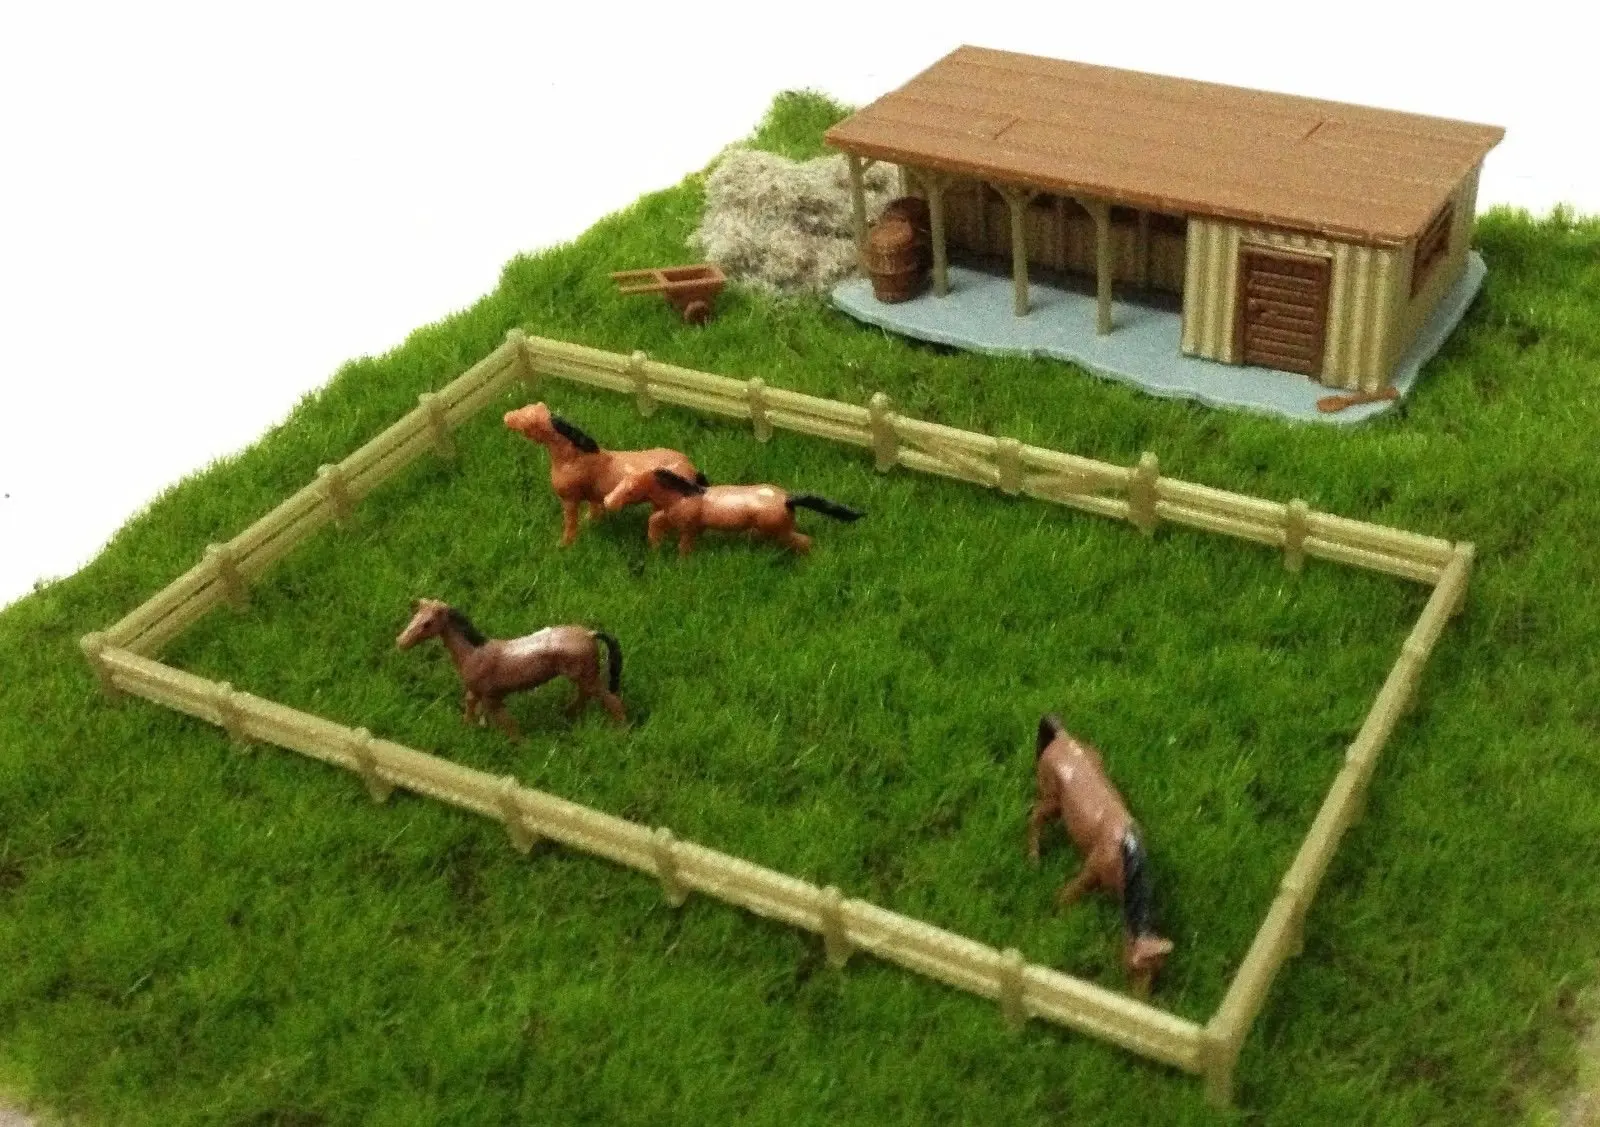 Outland Models Train Railway Layout Farm Stable with Horses & Grass HO OO Scale 